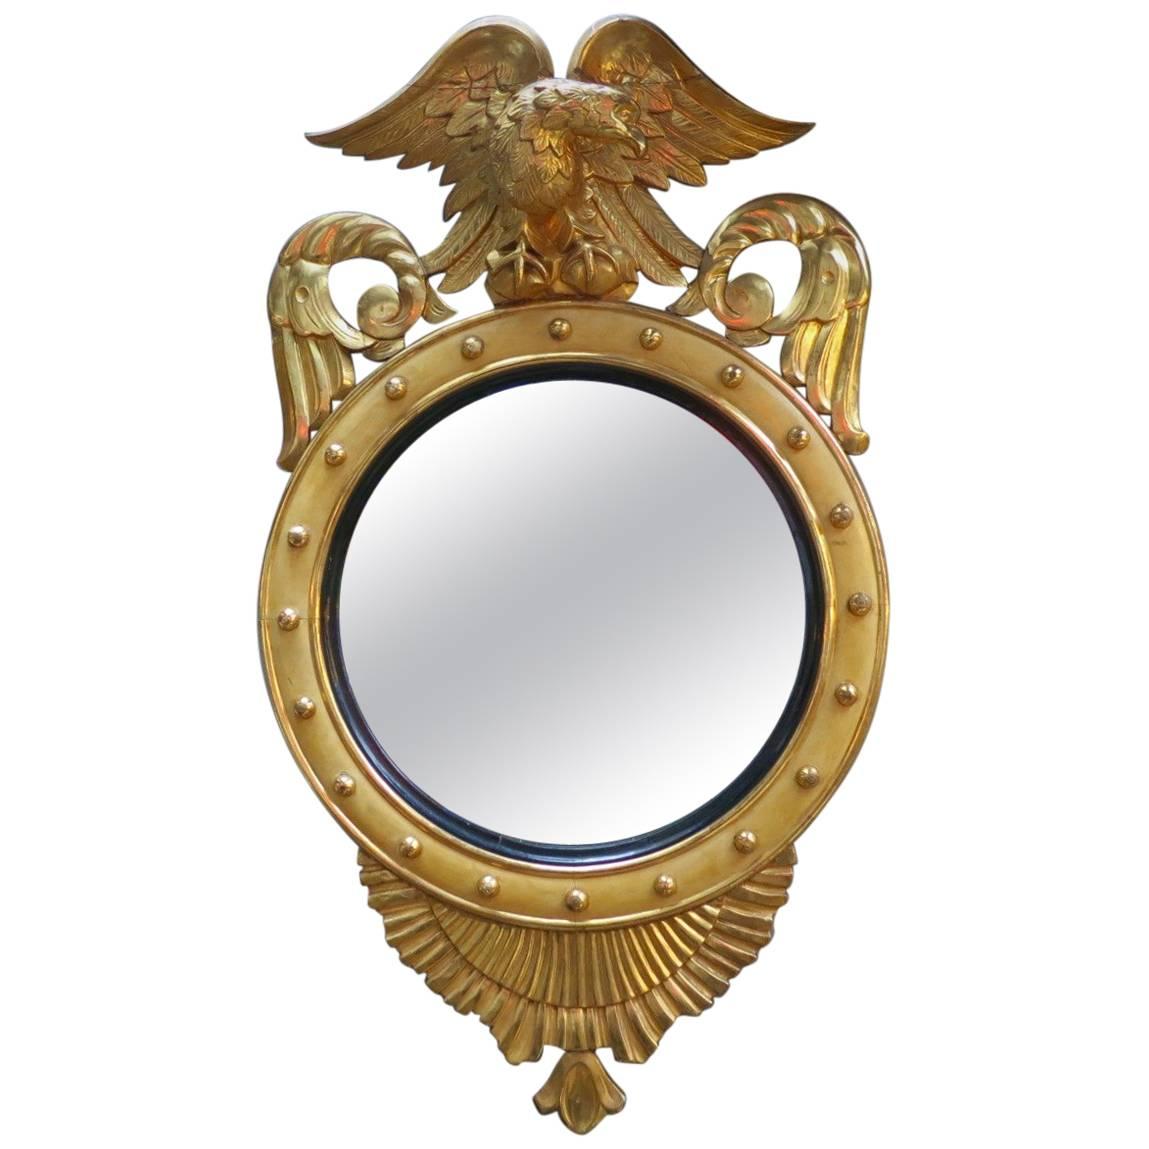 Early 20th Century Eagle Crested Circular Mirror